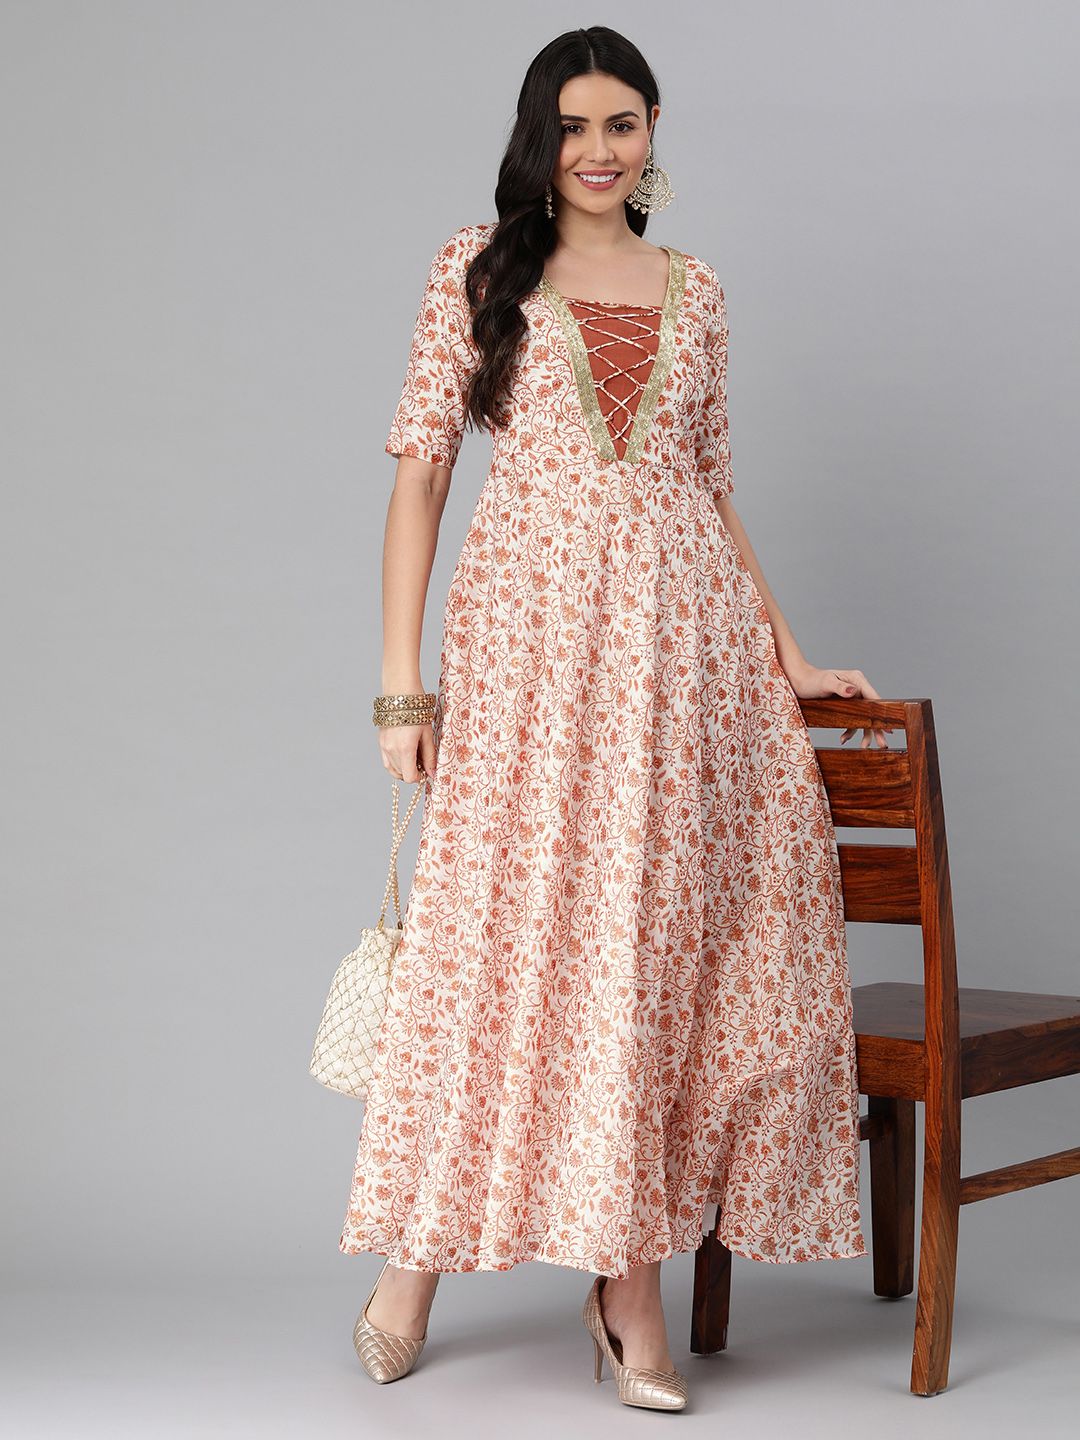 EthnoVogue White & Brown Made to Measure Floral Ethnic A-Line Maxi Ethnic Dress Price in India